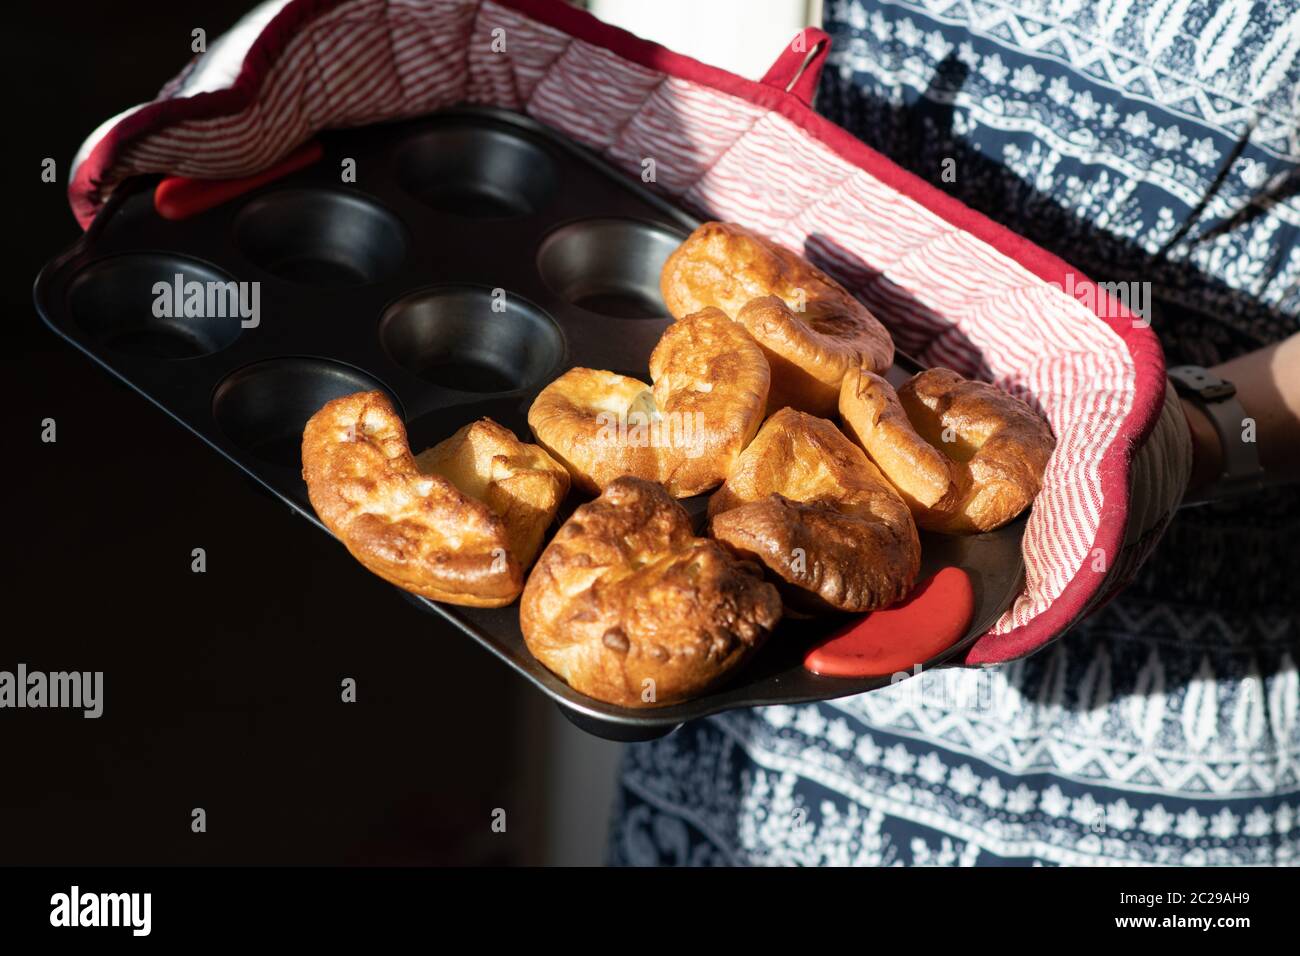 A fresh batch of traditional baked Yorkshire puddings for a Sunday roast lunch in England Stock Photo